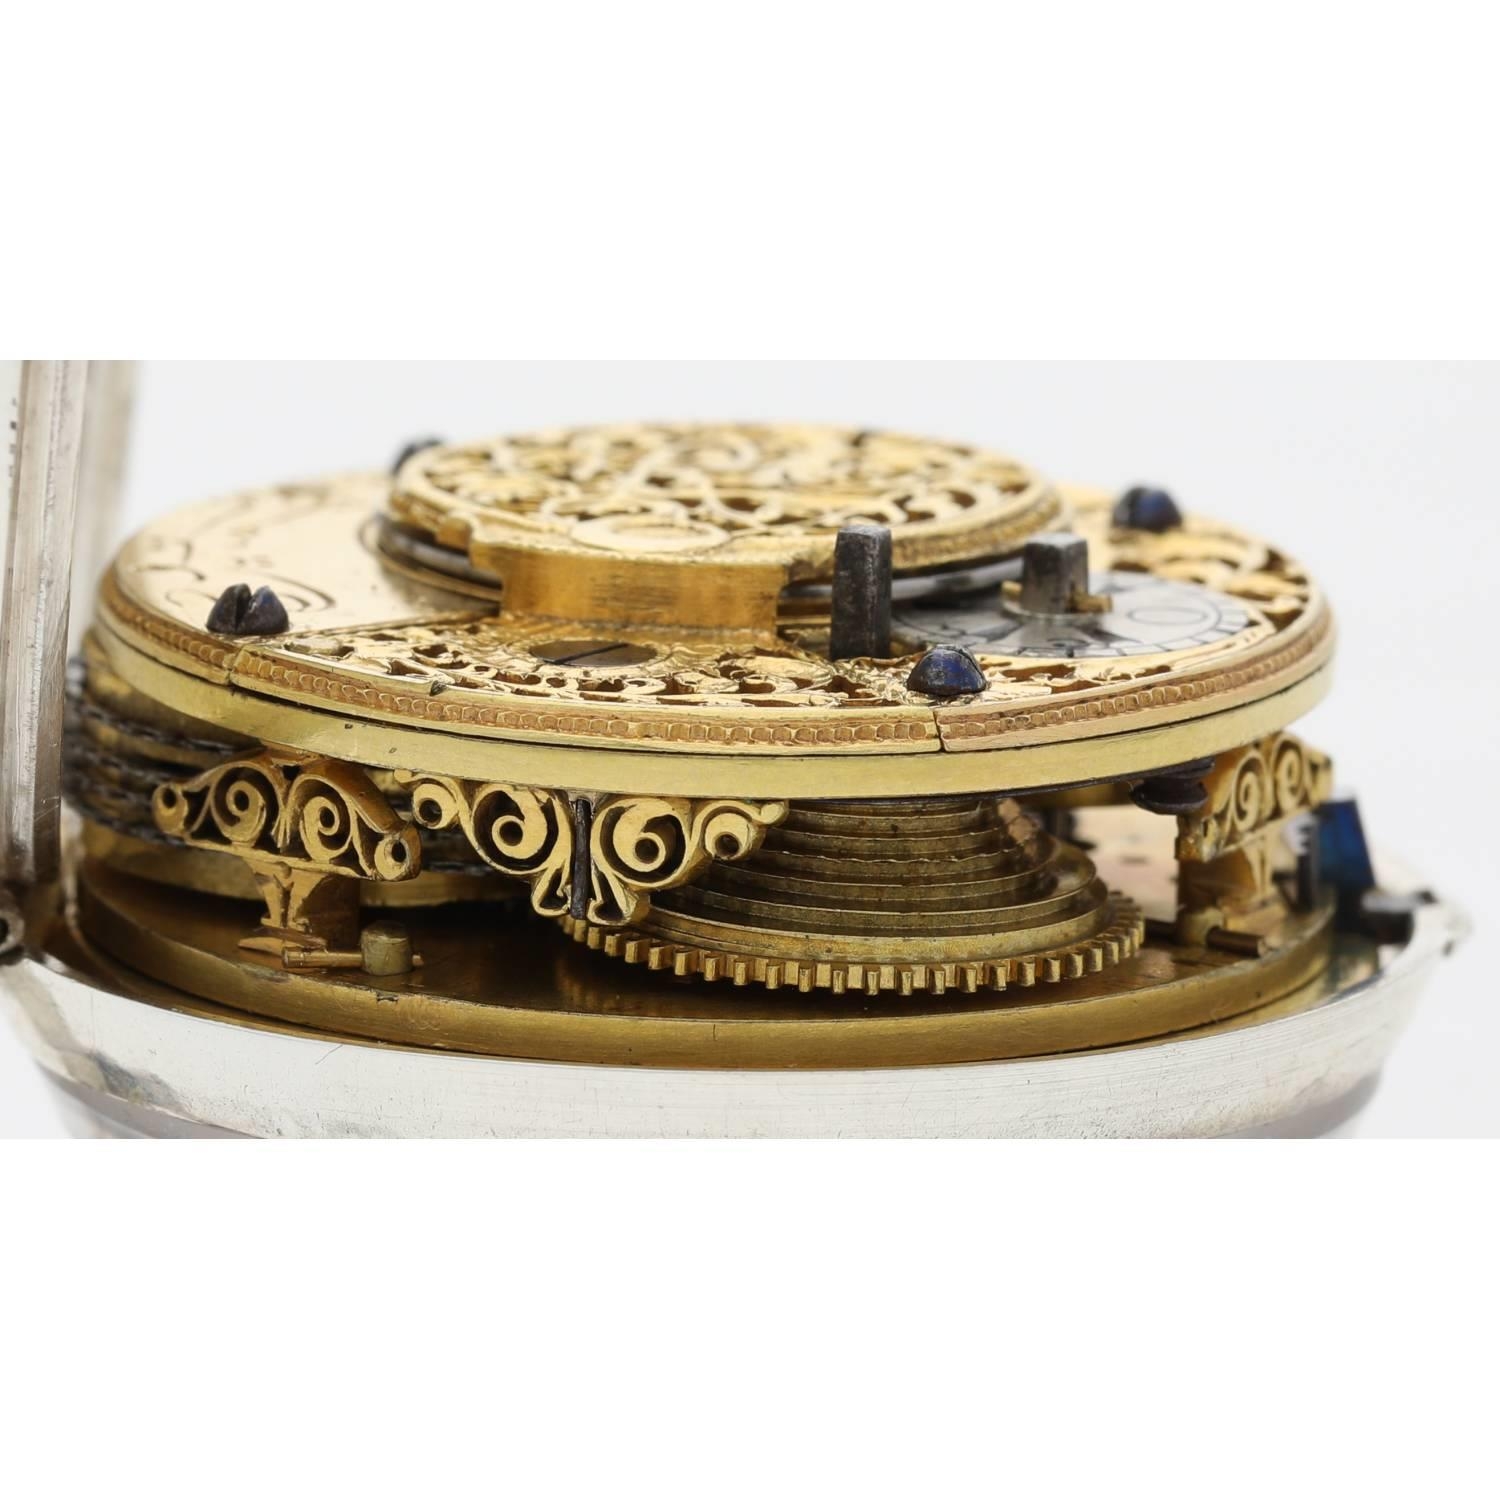 Ralph Gout, London - early 19th century silver and tortoiseshell triple cased verge pocket watch - Image 5 of 13